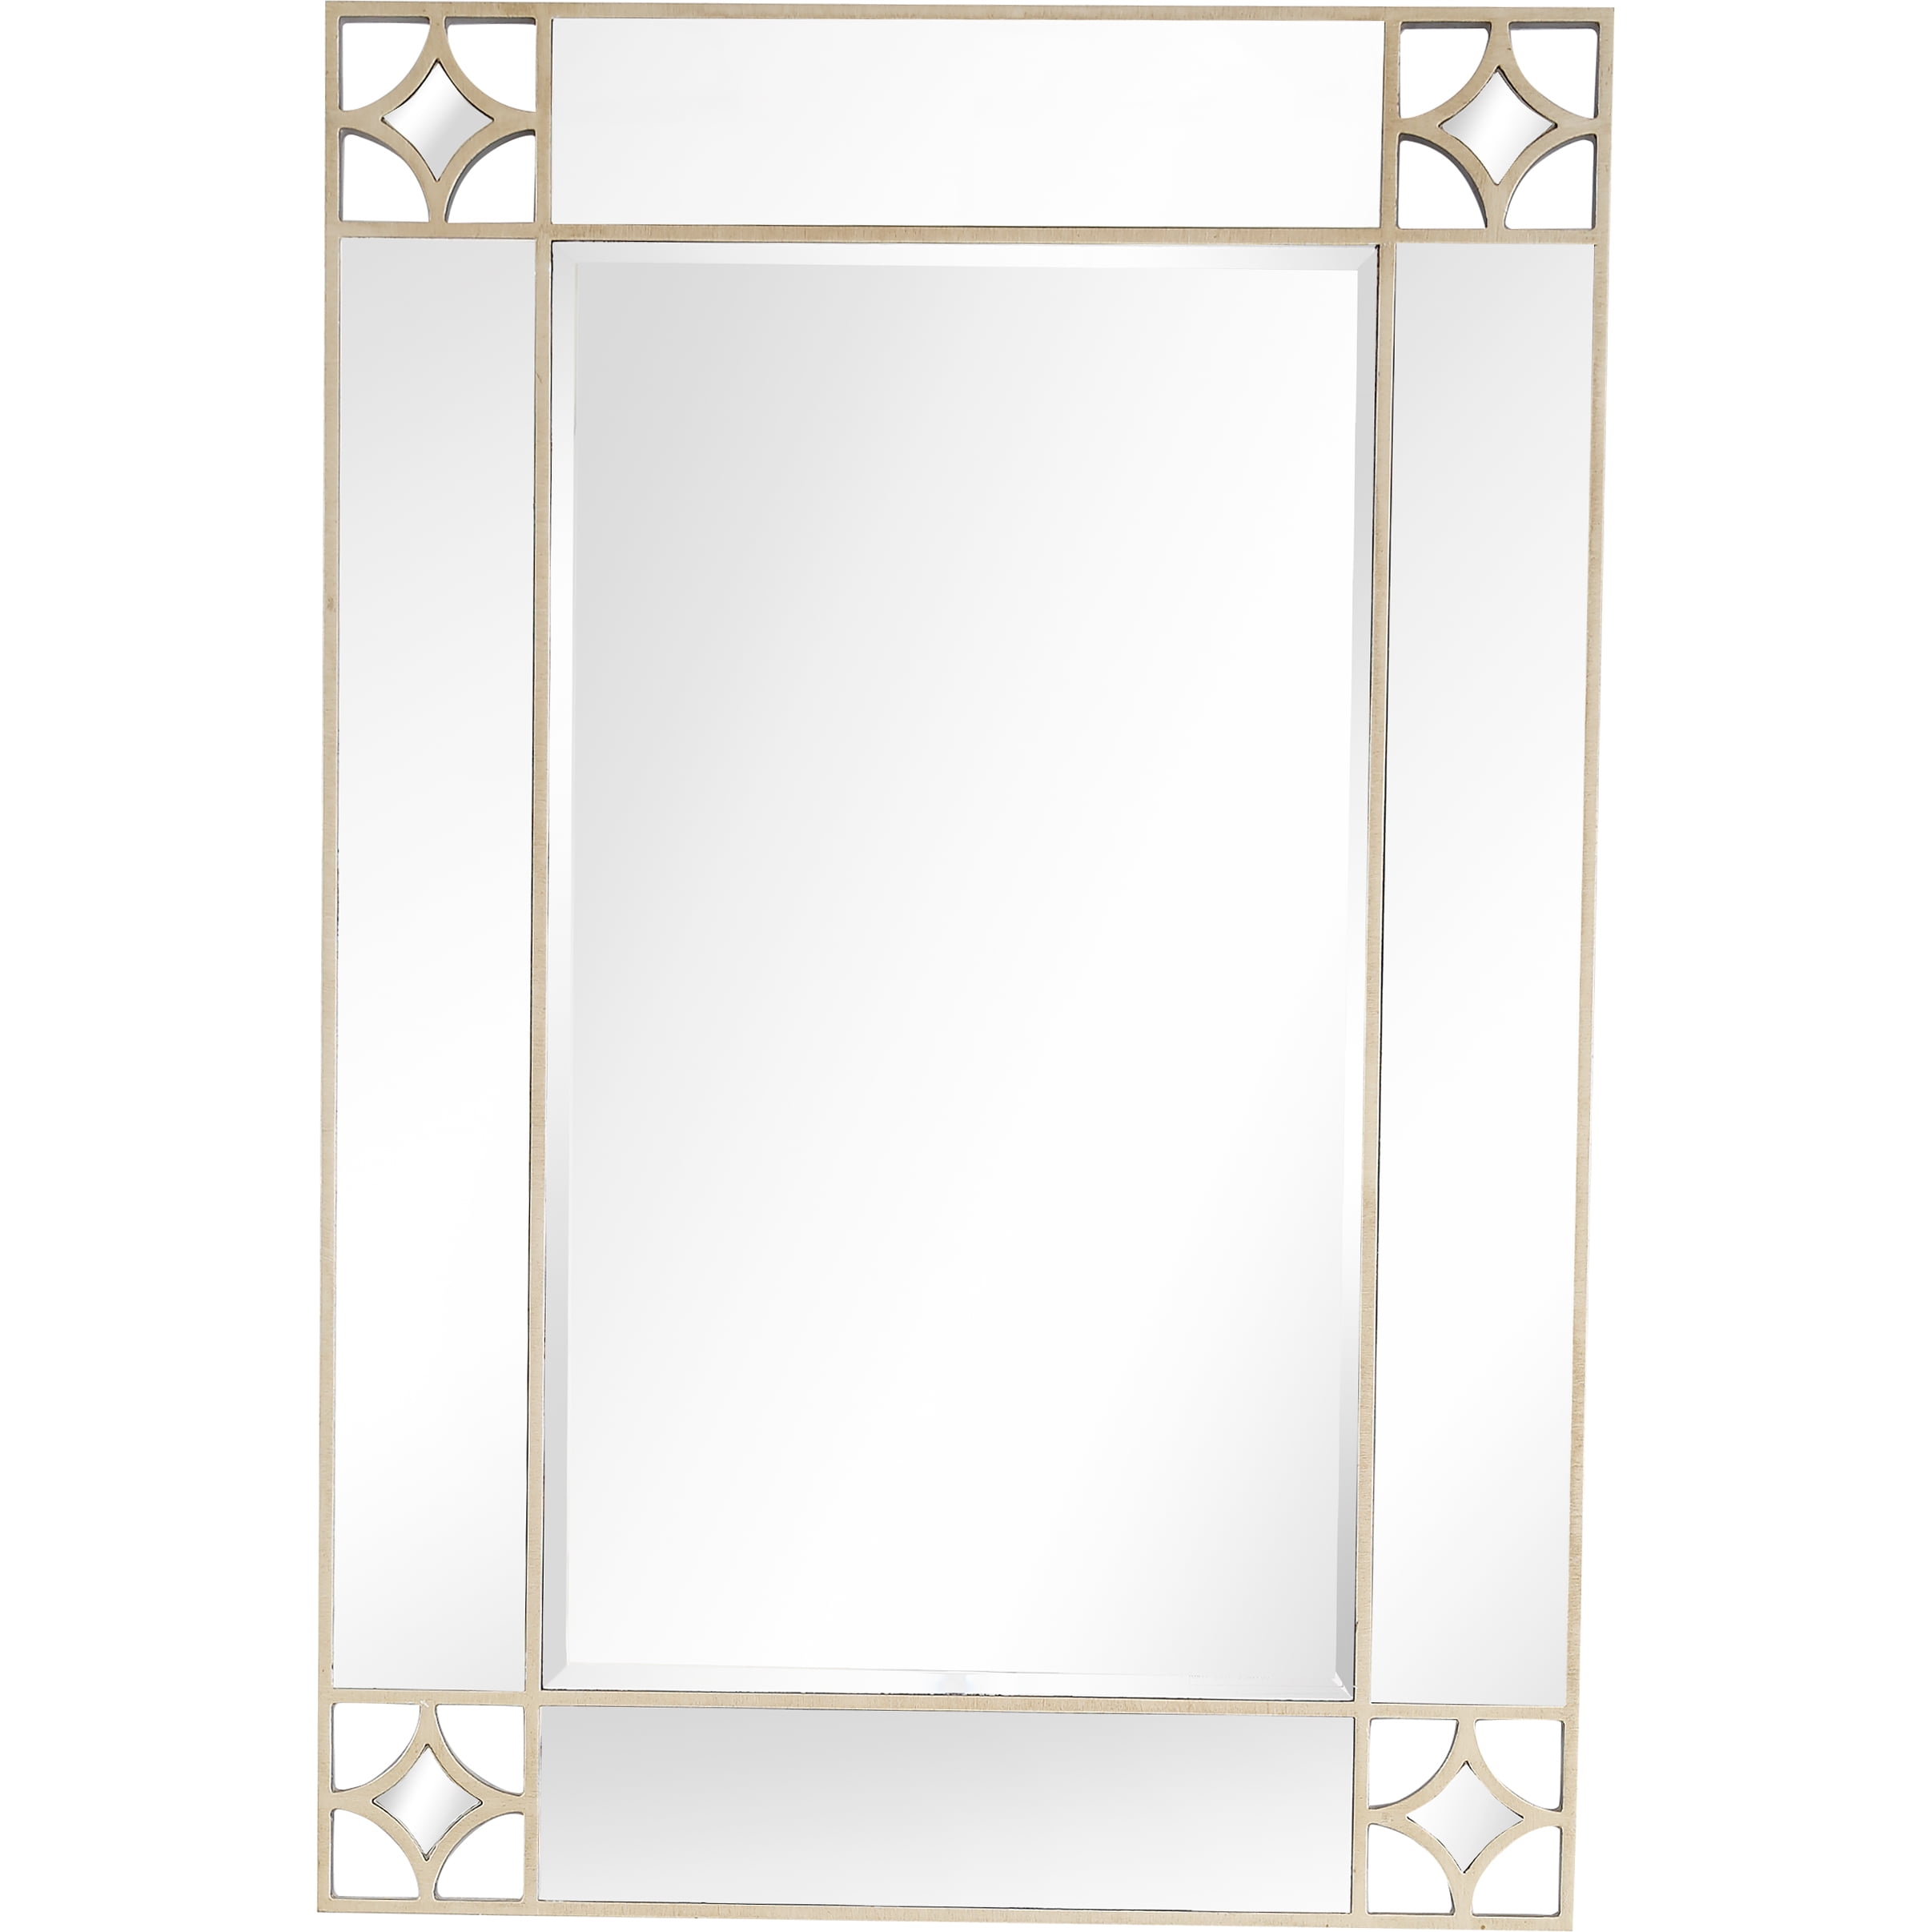 Picture of Camden Isle 86438 Huxley Wall Mirror